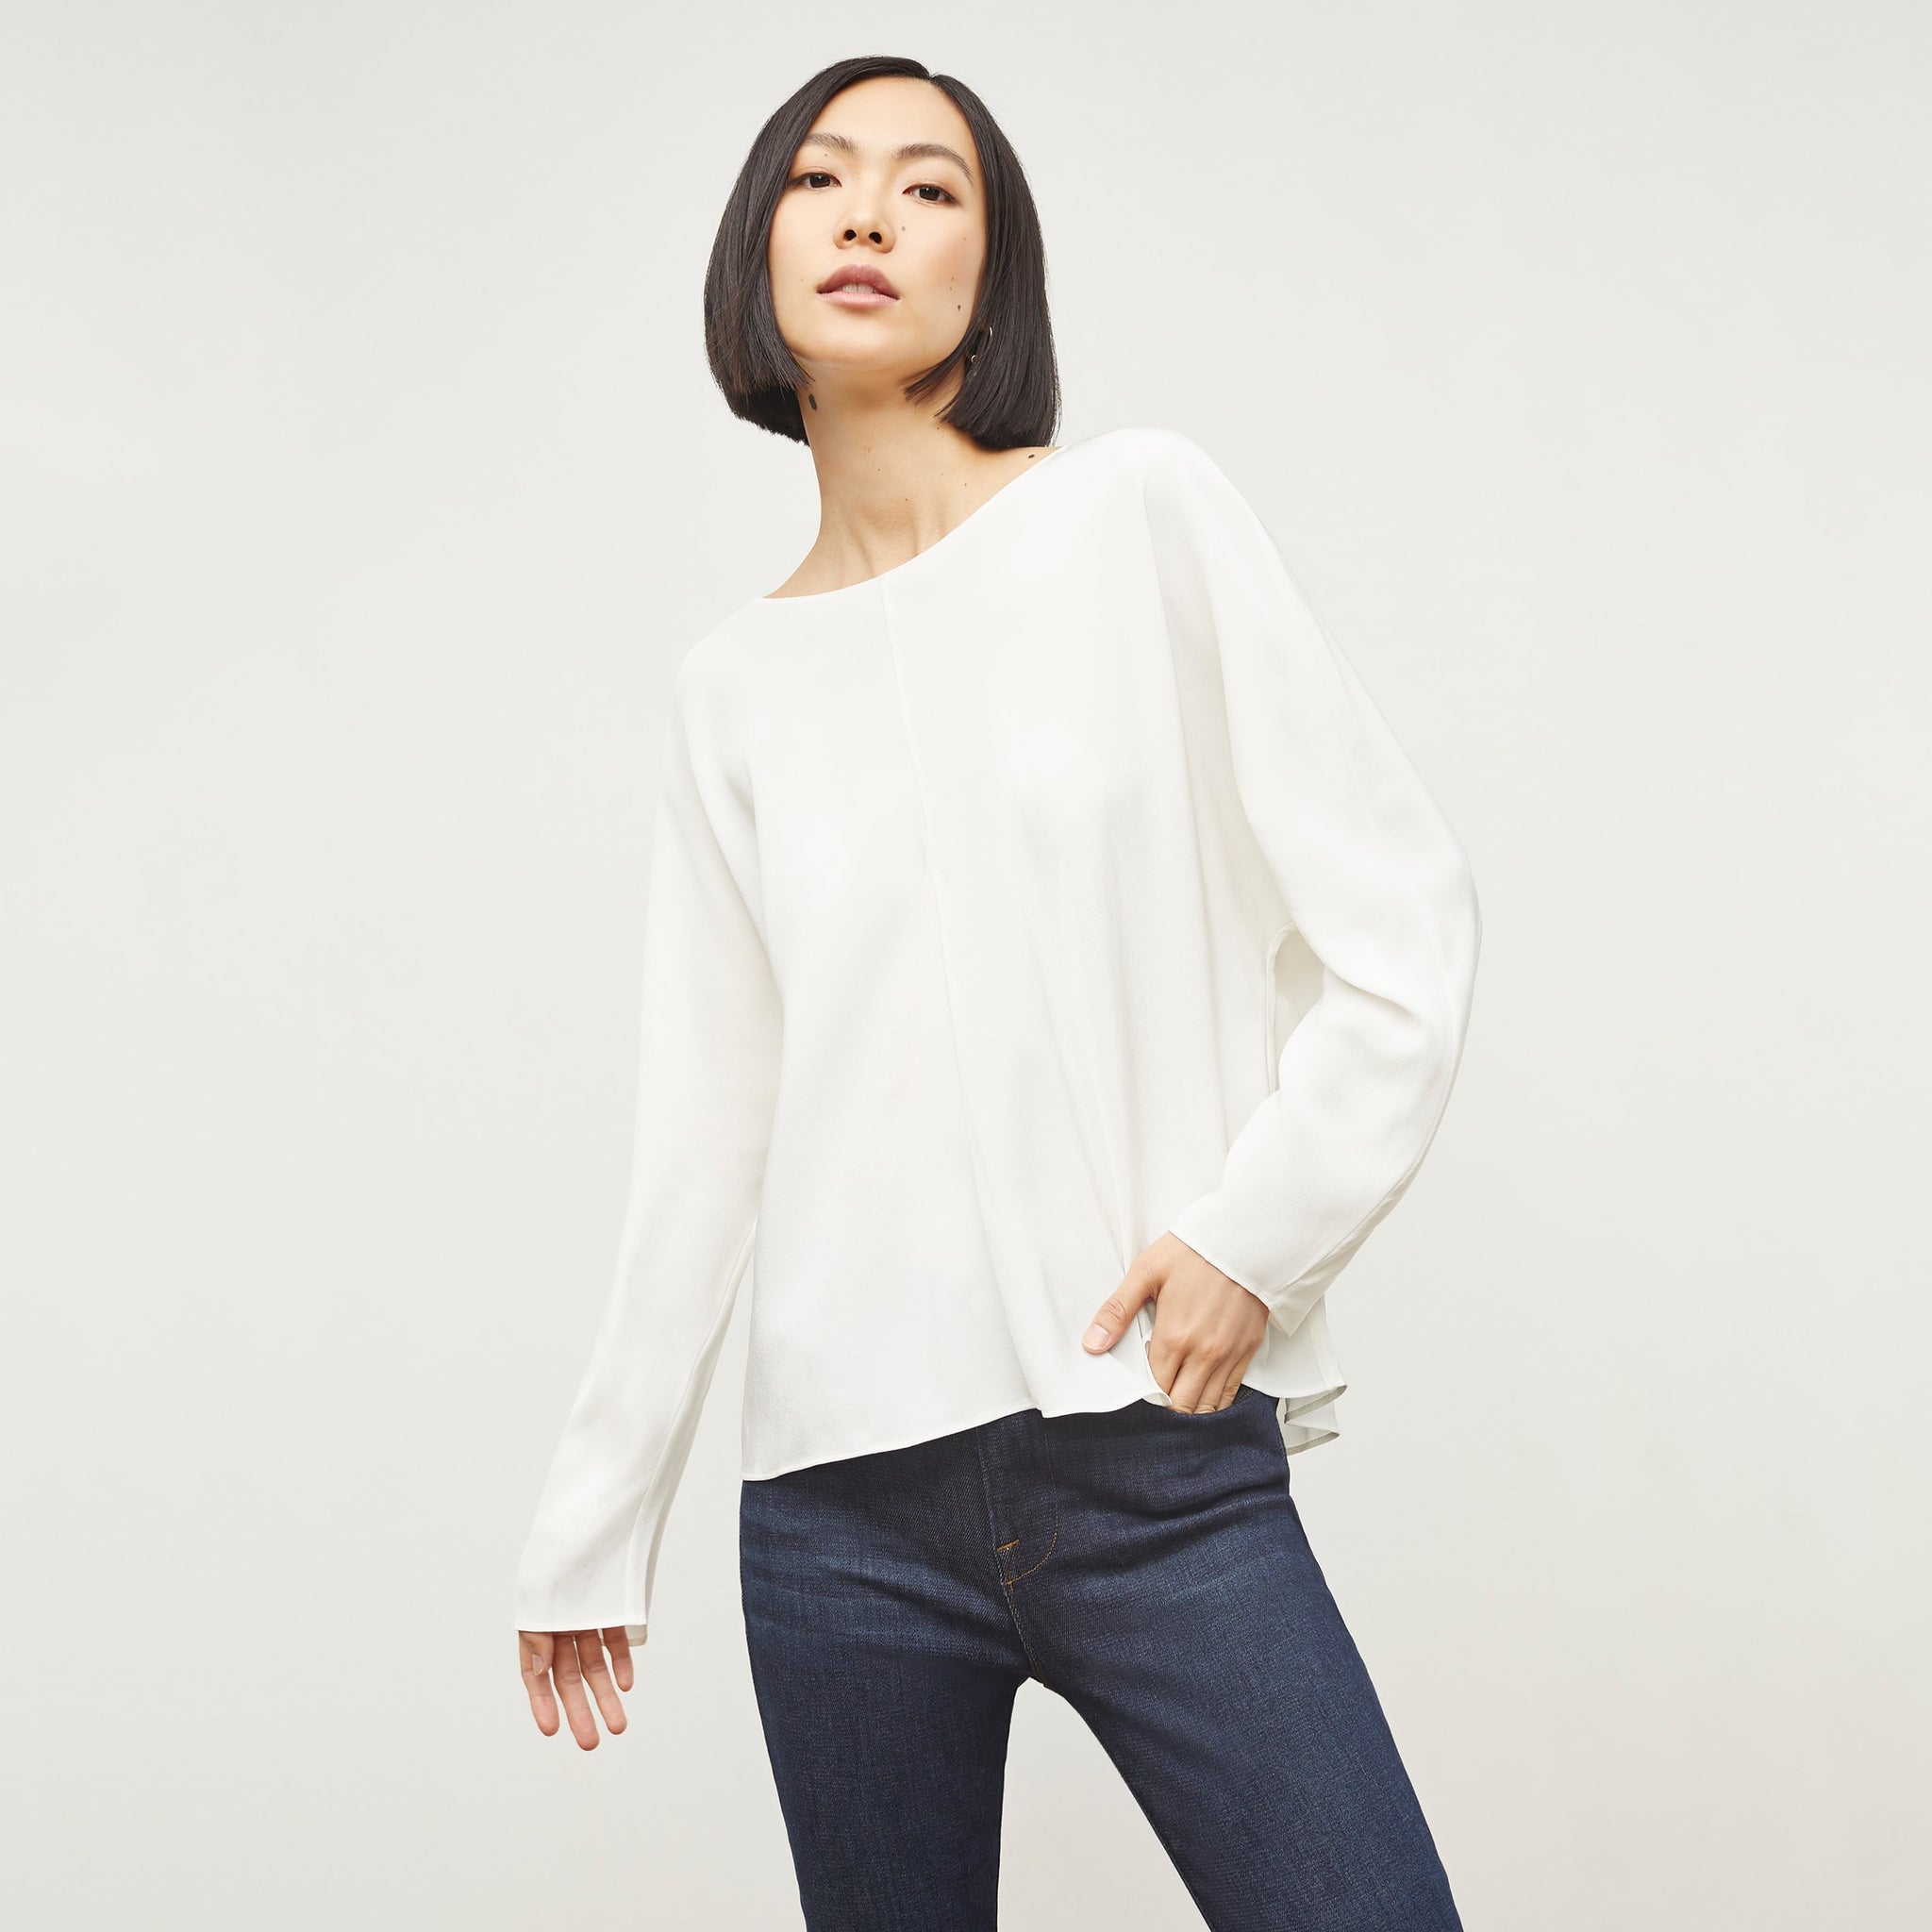 Image of a woman wearing the Wren top in ivory